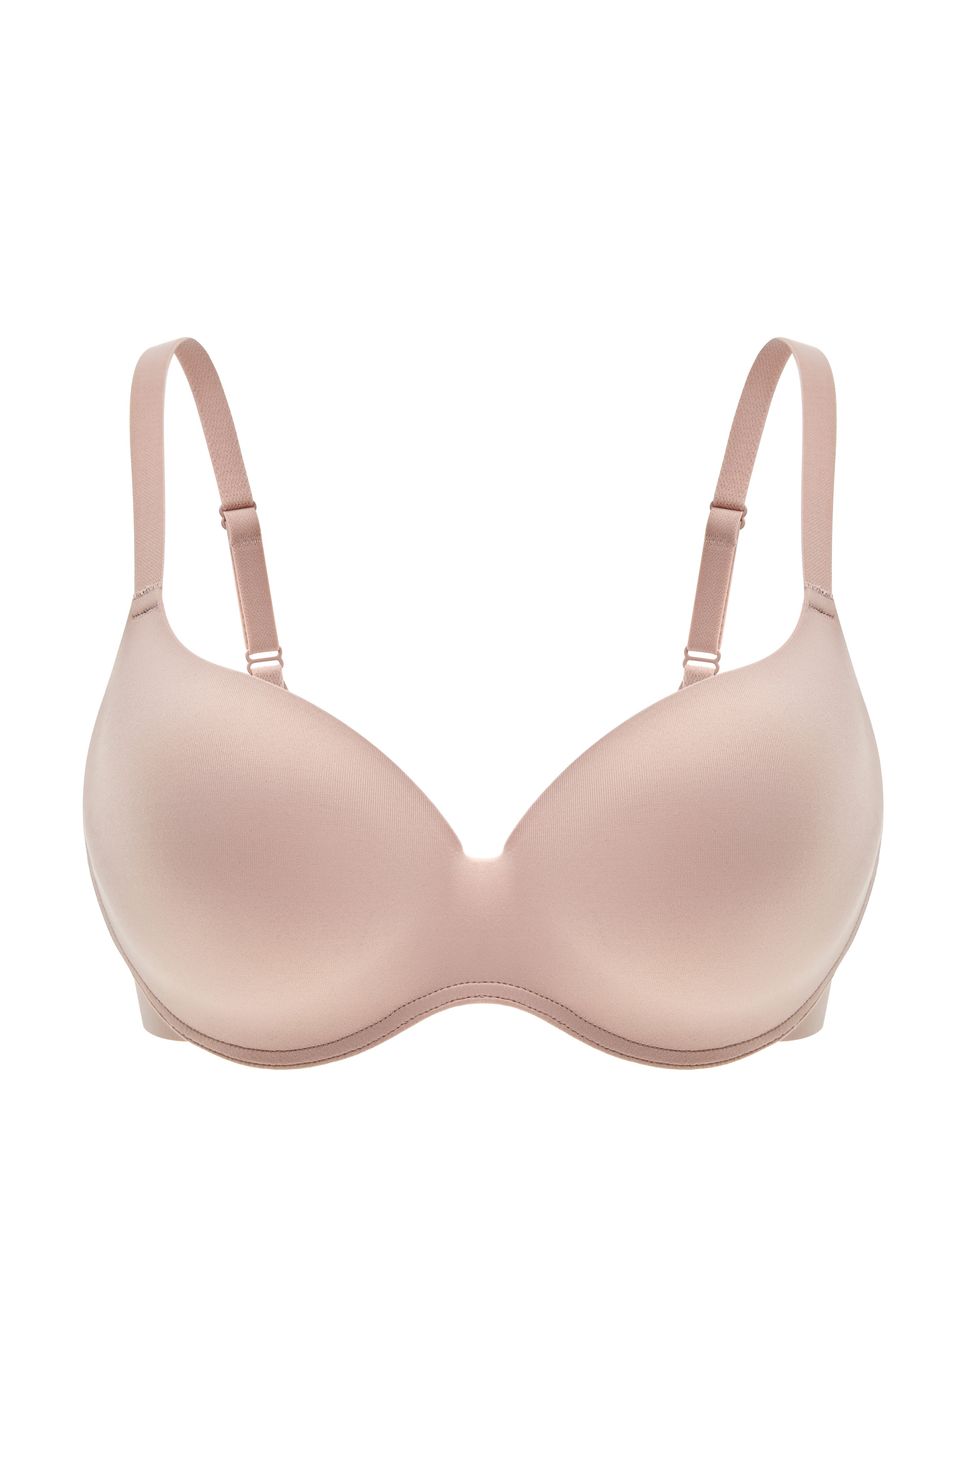 Luvlette Dream Curve Support+ Seamless Push-Up Longline Strapless